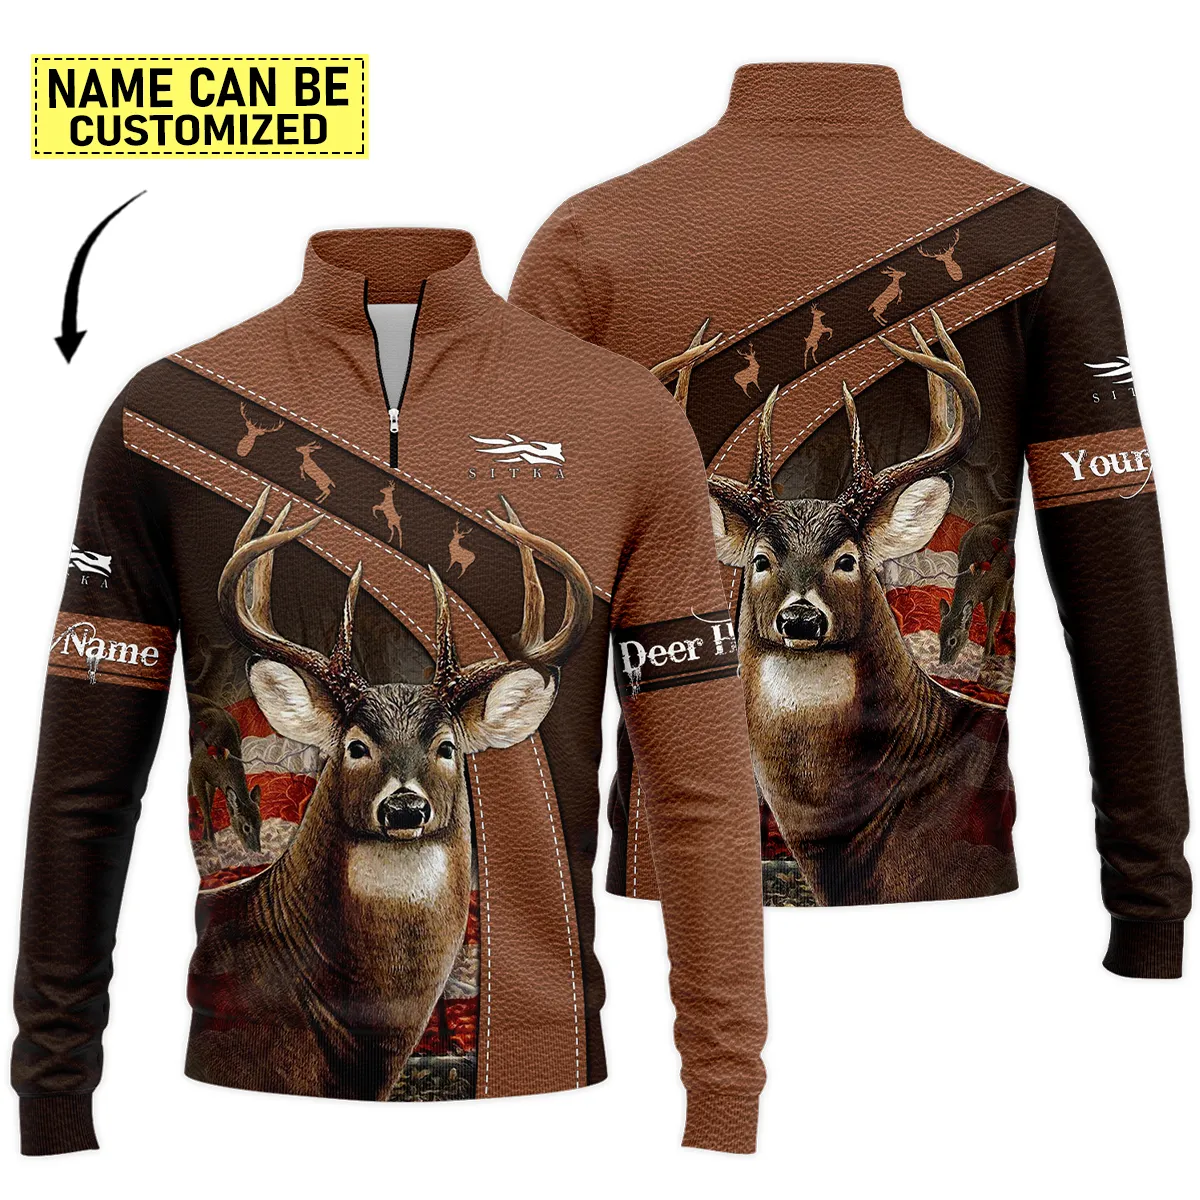 Personalized Name Deer Hunting Leather Brown Sitka Gear s Quarter-Zip Jacket